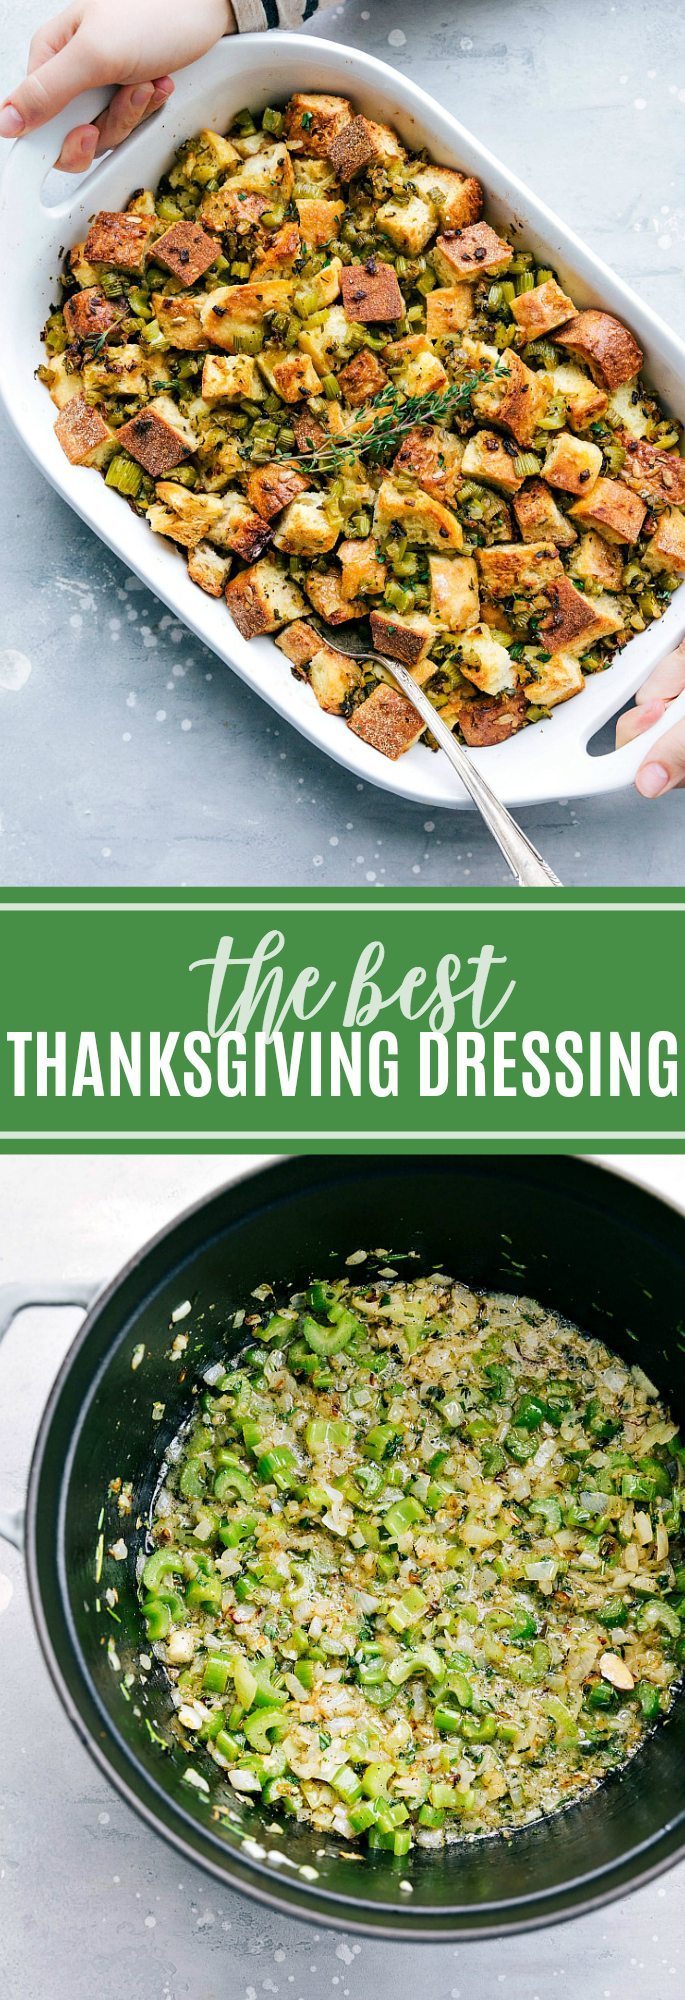 The Best Simple Thanksgiving Dressing - Chelsea's Messy Apron